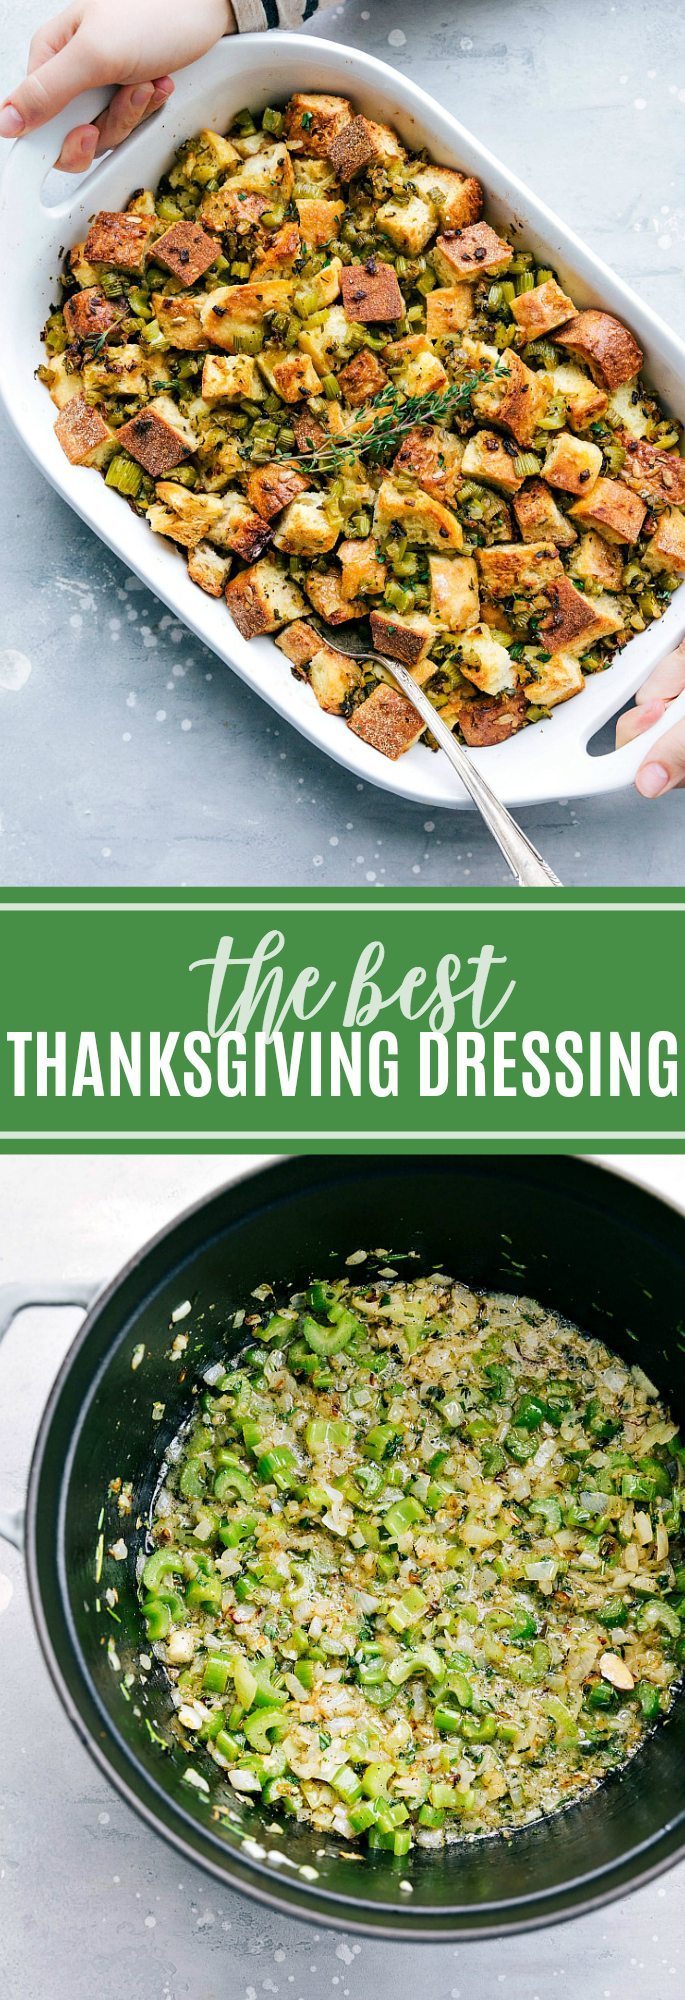 The Best Simple Thanksgiving Dressing - Chelsea's Messy Apron